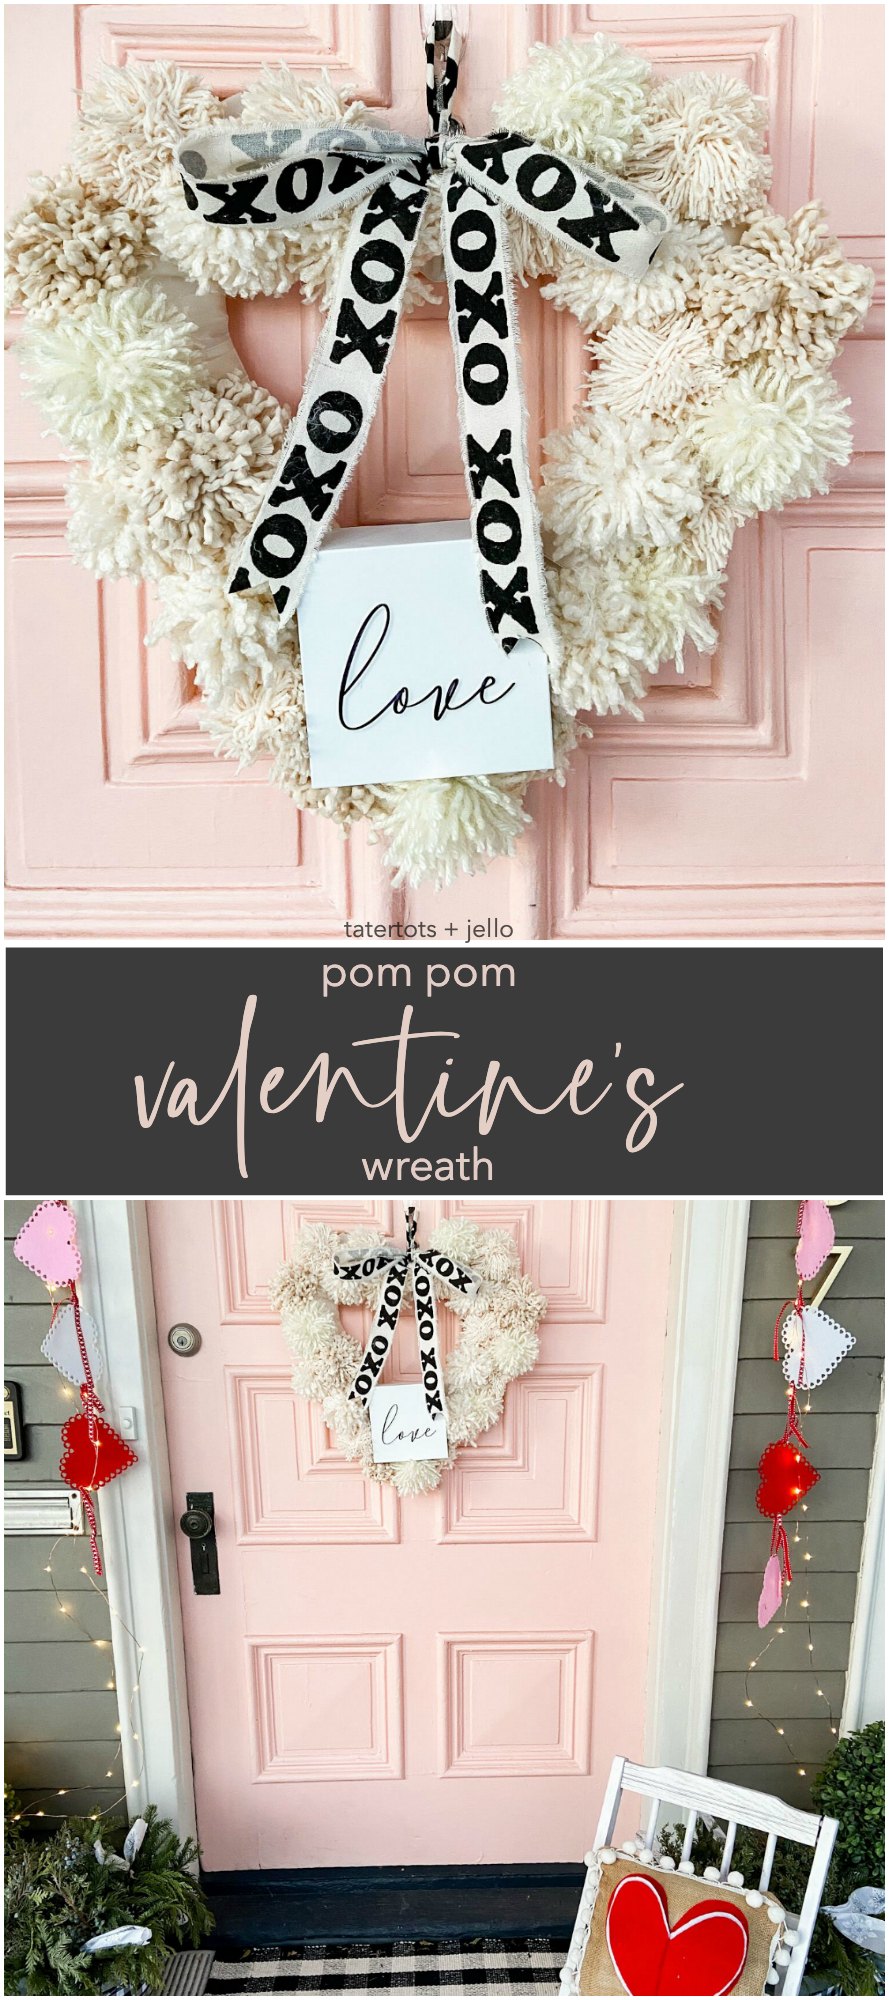 Farmhouse Valentine's Day wreath. How to Make a Valentine Heart Pom Pom Yarn Wreath. Brighten up your door this winter with a textured pom pom wreath for valentine's Day!